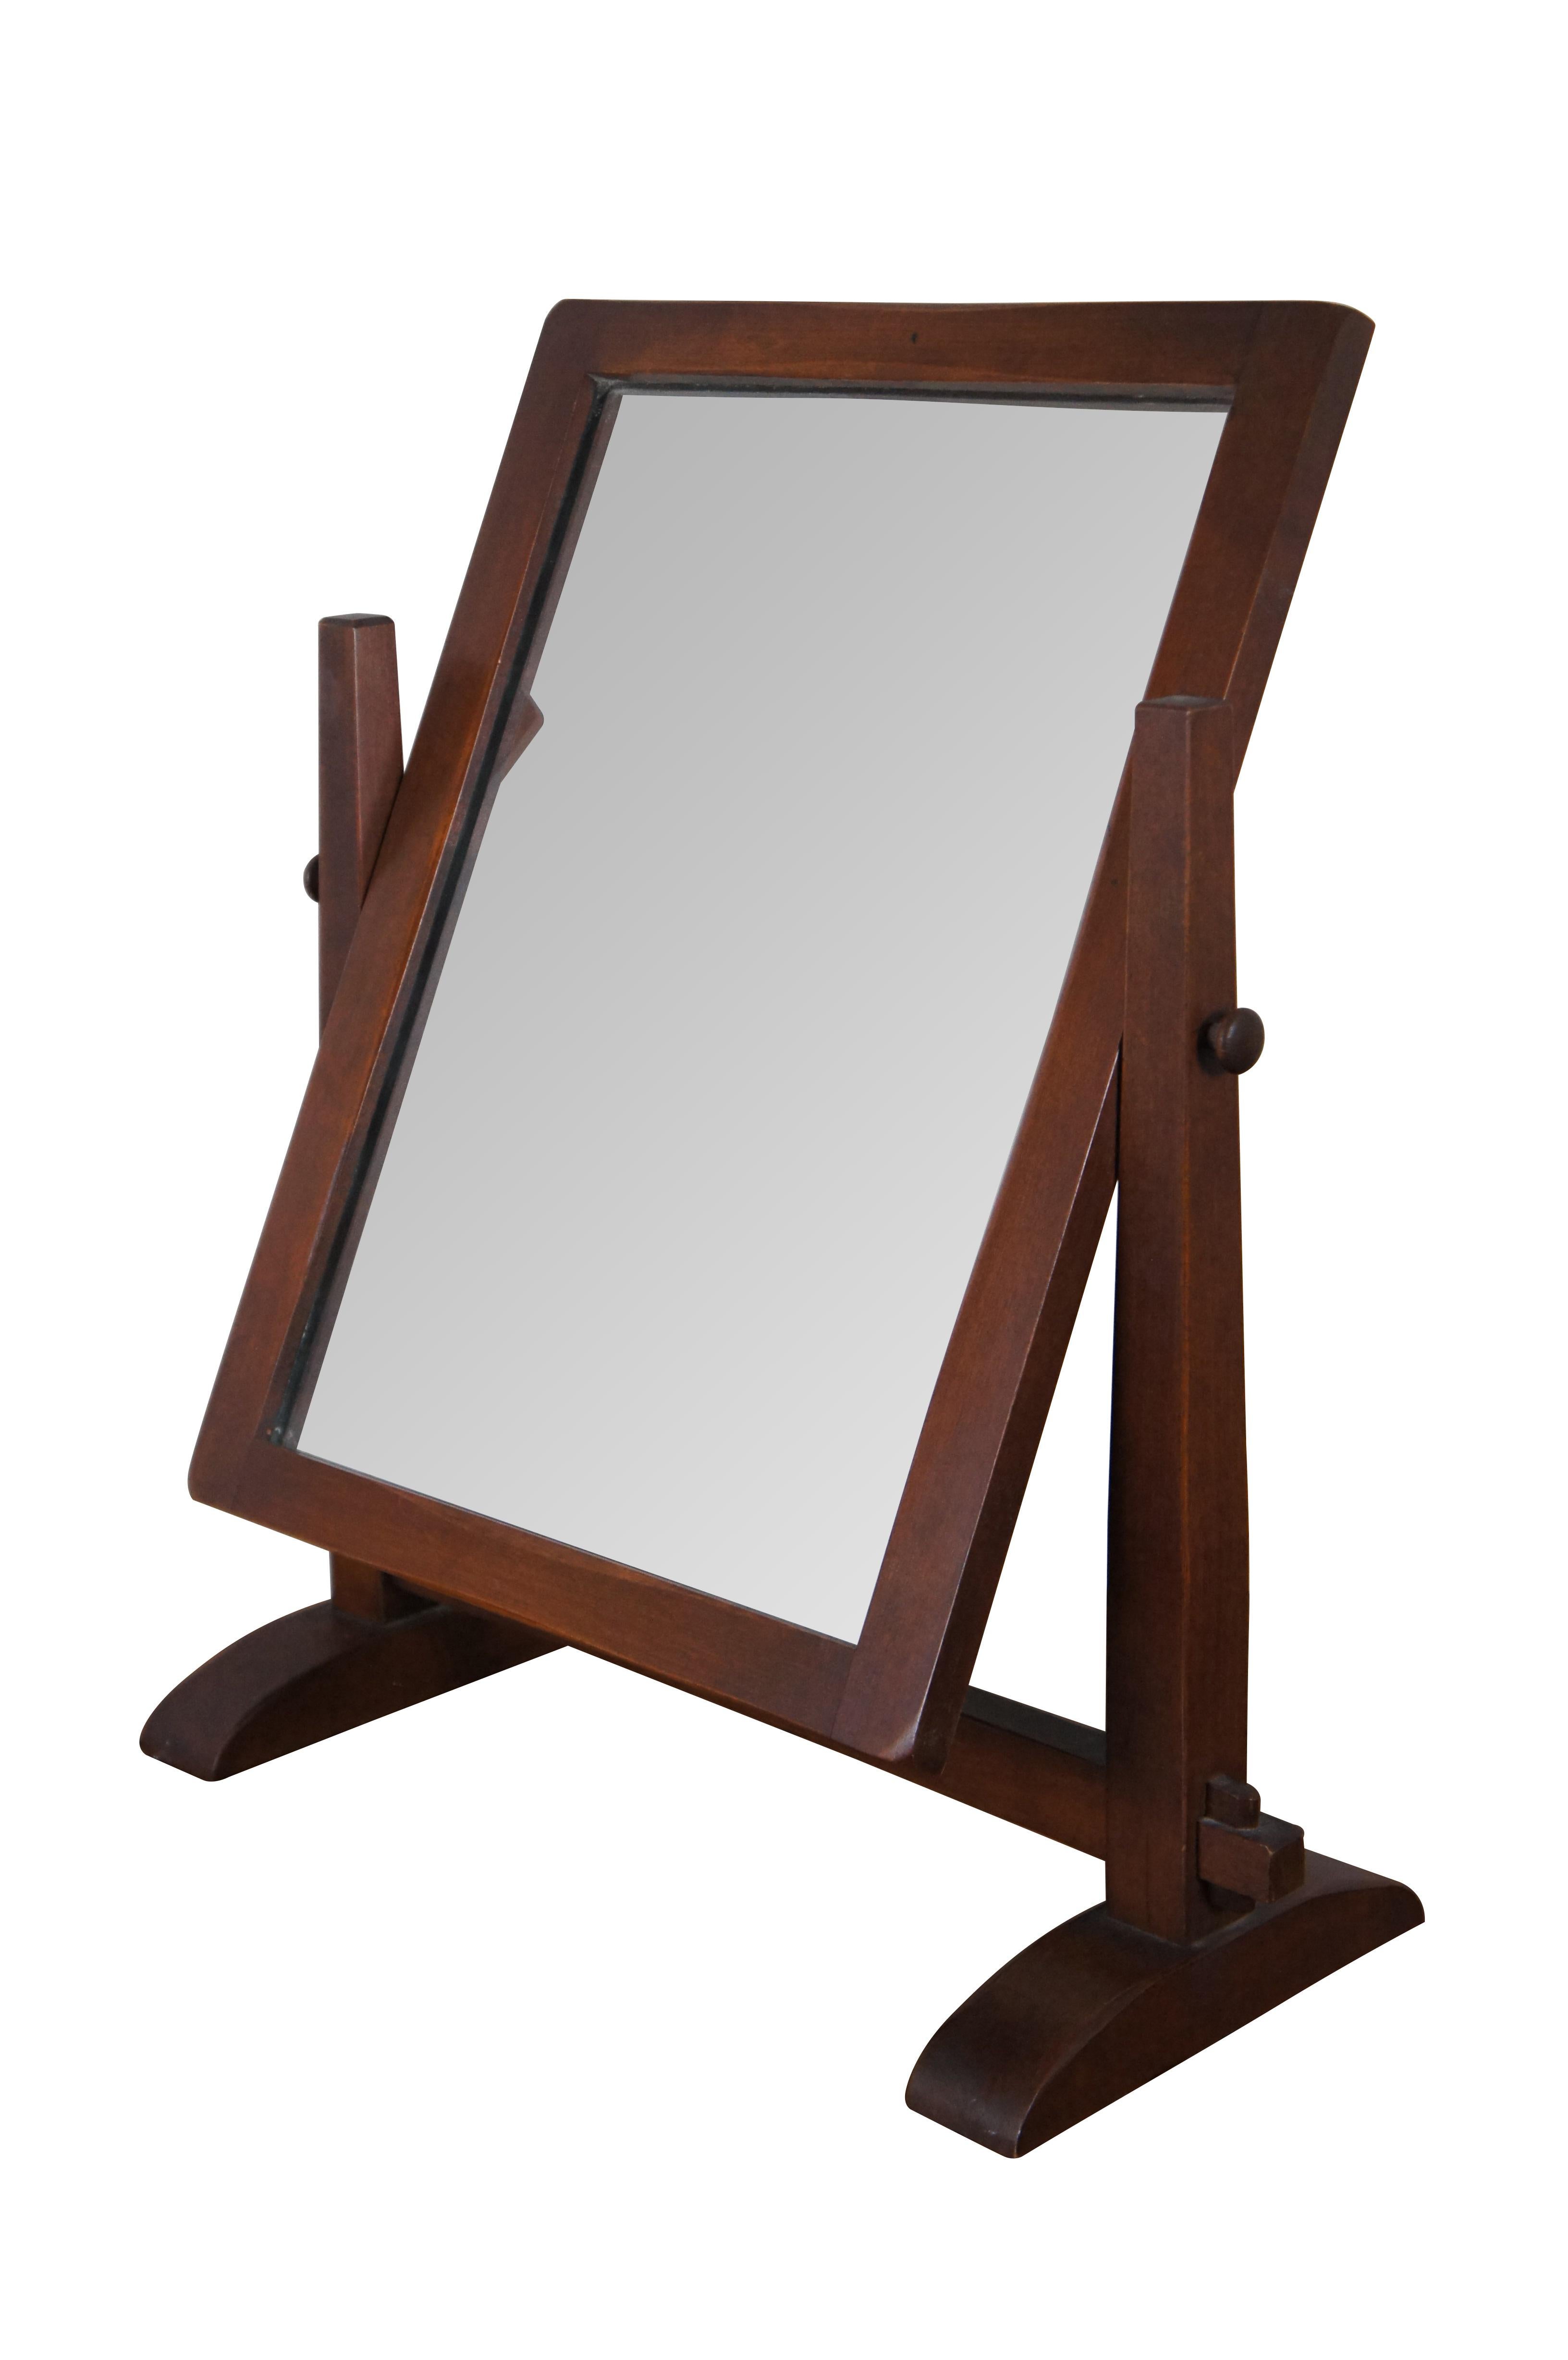 Antique Old Meeting House dresser / table top shaving or vanity mirror.  Made of maple featuring Mission styling with swivel stand.

Winchendon Furniture Corporation
Founded: In 1923 by John H. Murray and his brother Patrick. Until 1935, it was